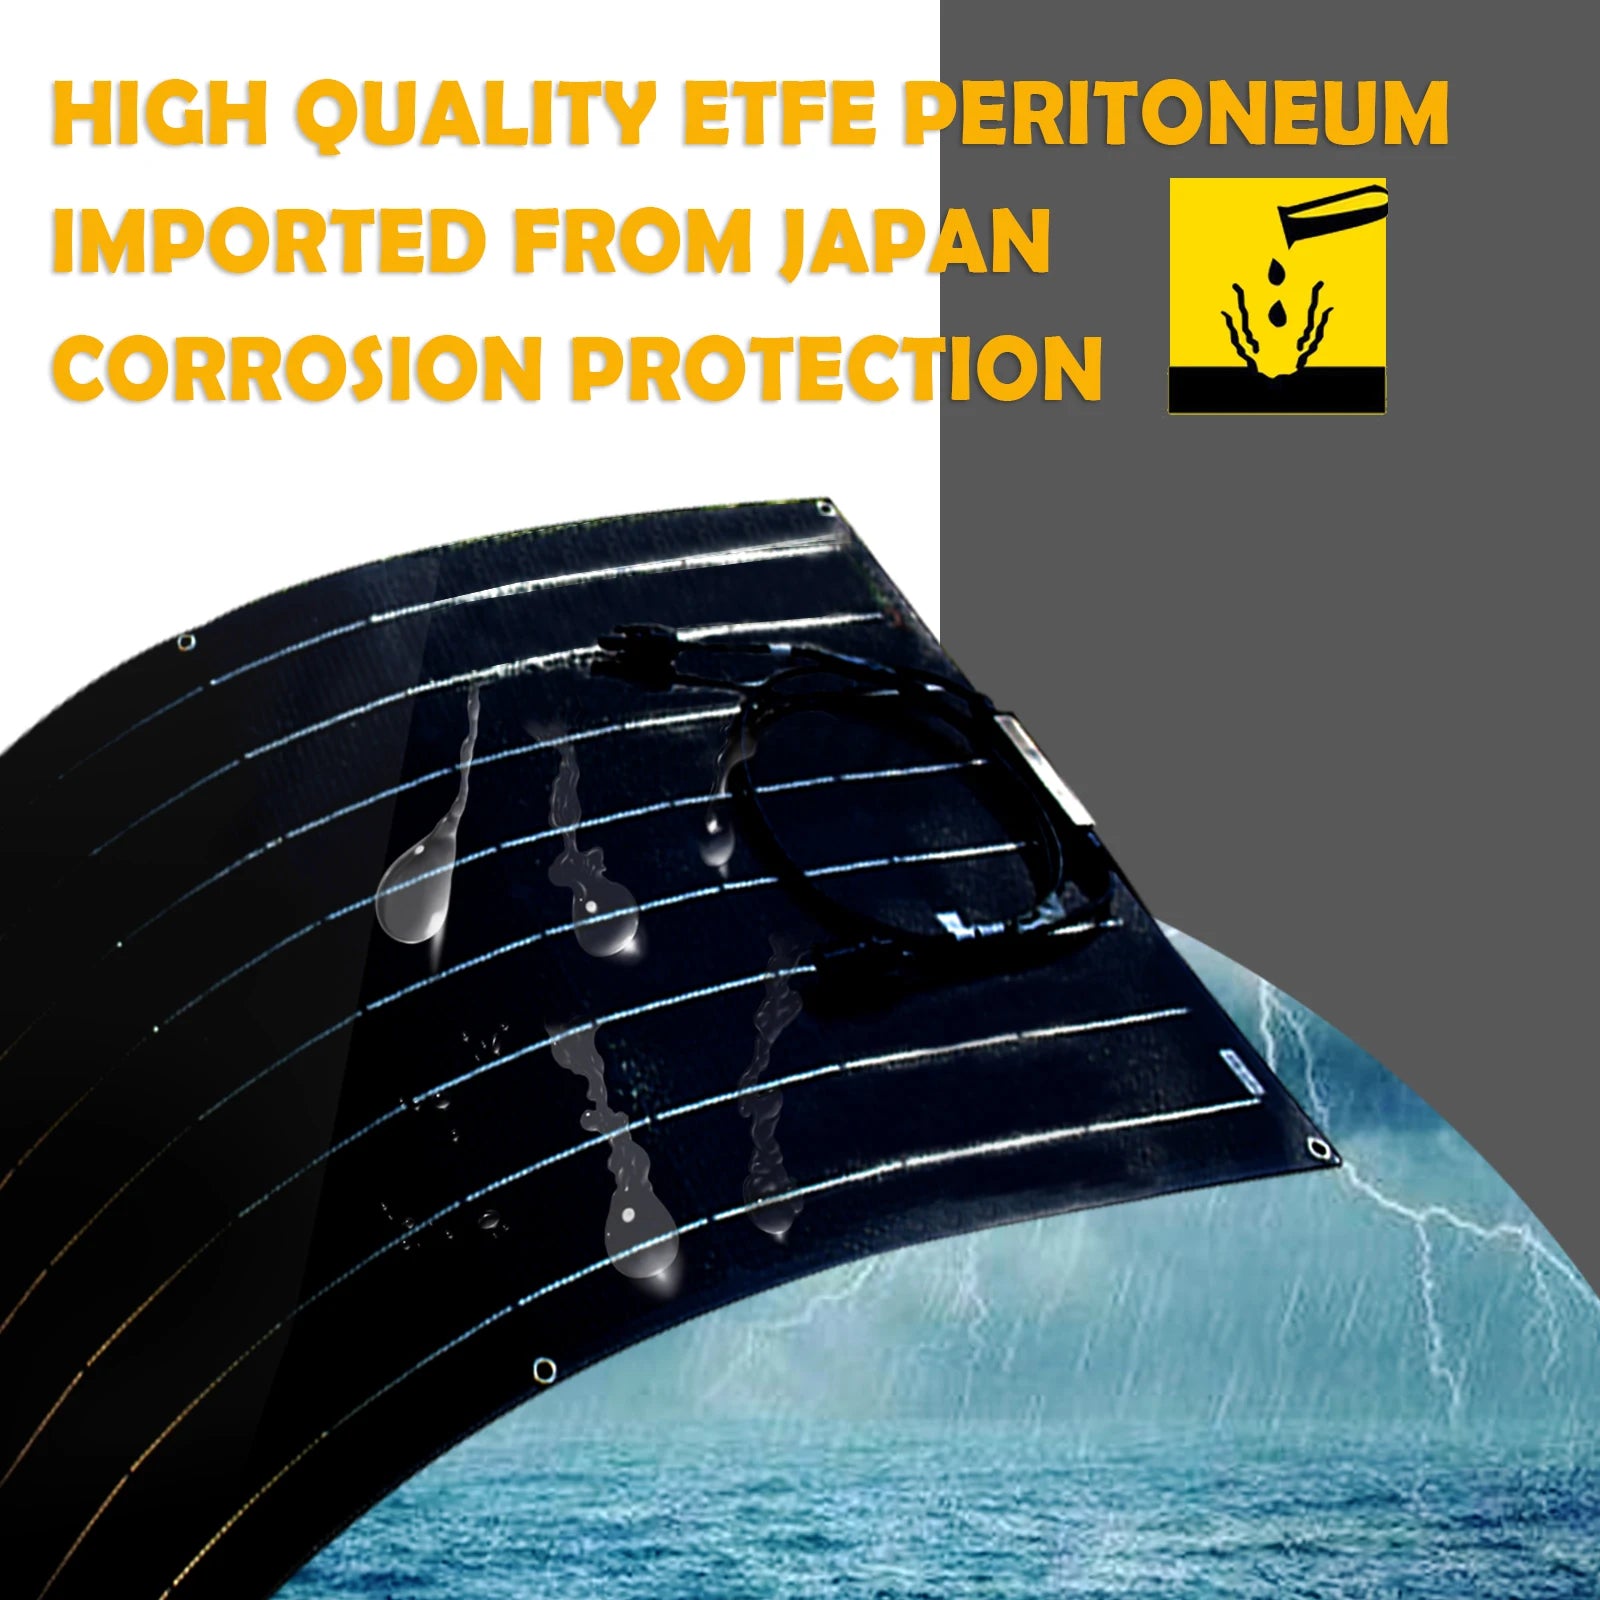 JINGYANG long lasting Semi Flexible solar panel, High-quality ETEF film imported from Japan provides corrosion protection.